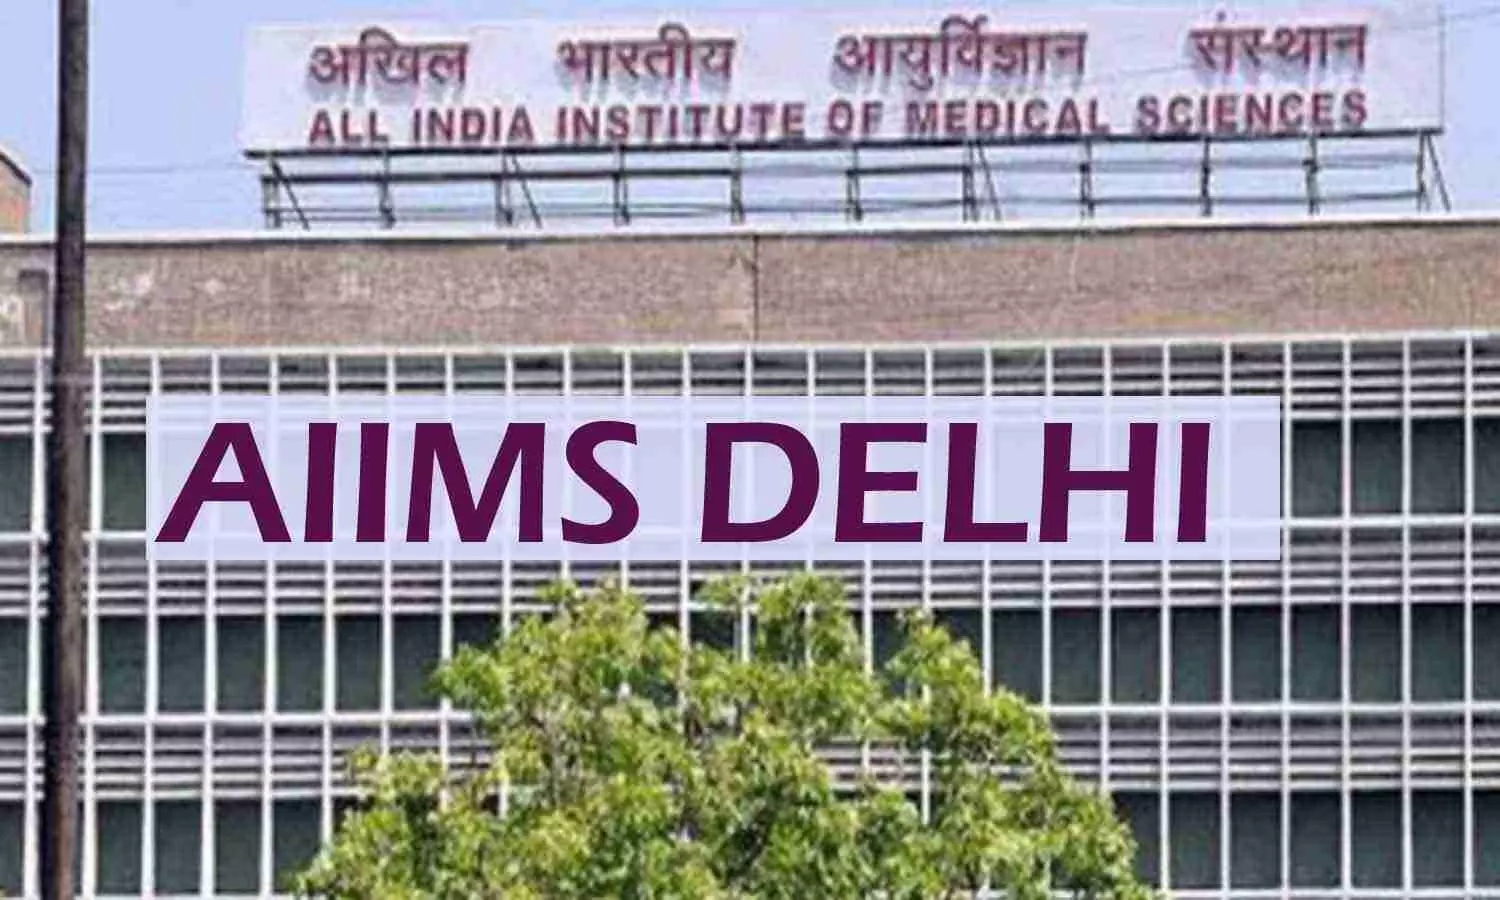 COVID-19 testing discontinued by AIIMS Delhi before inpatient hospitalizations, surgeries